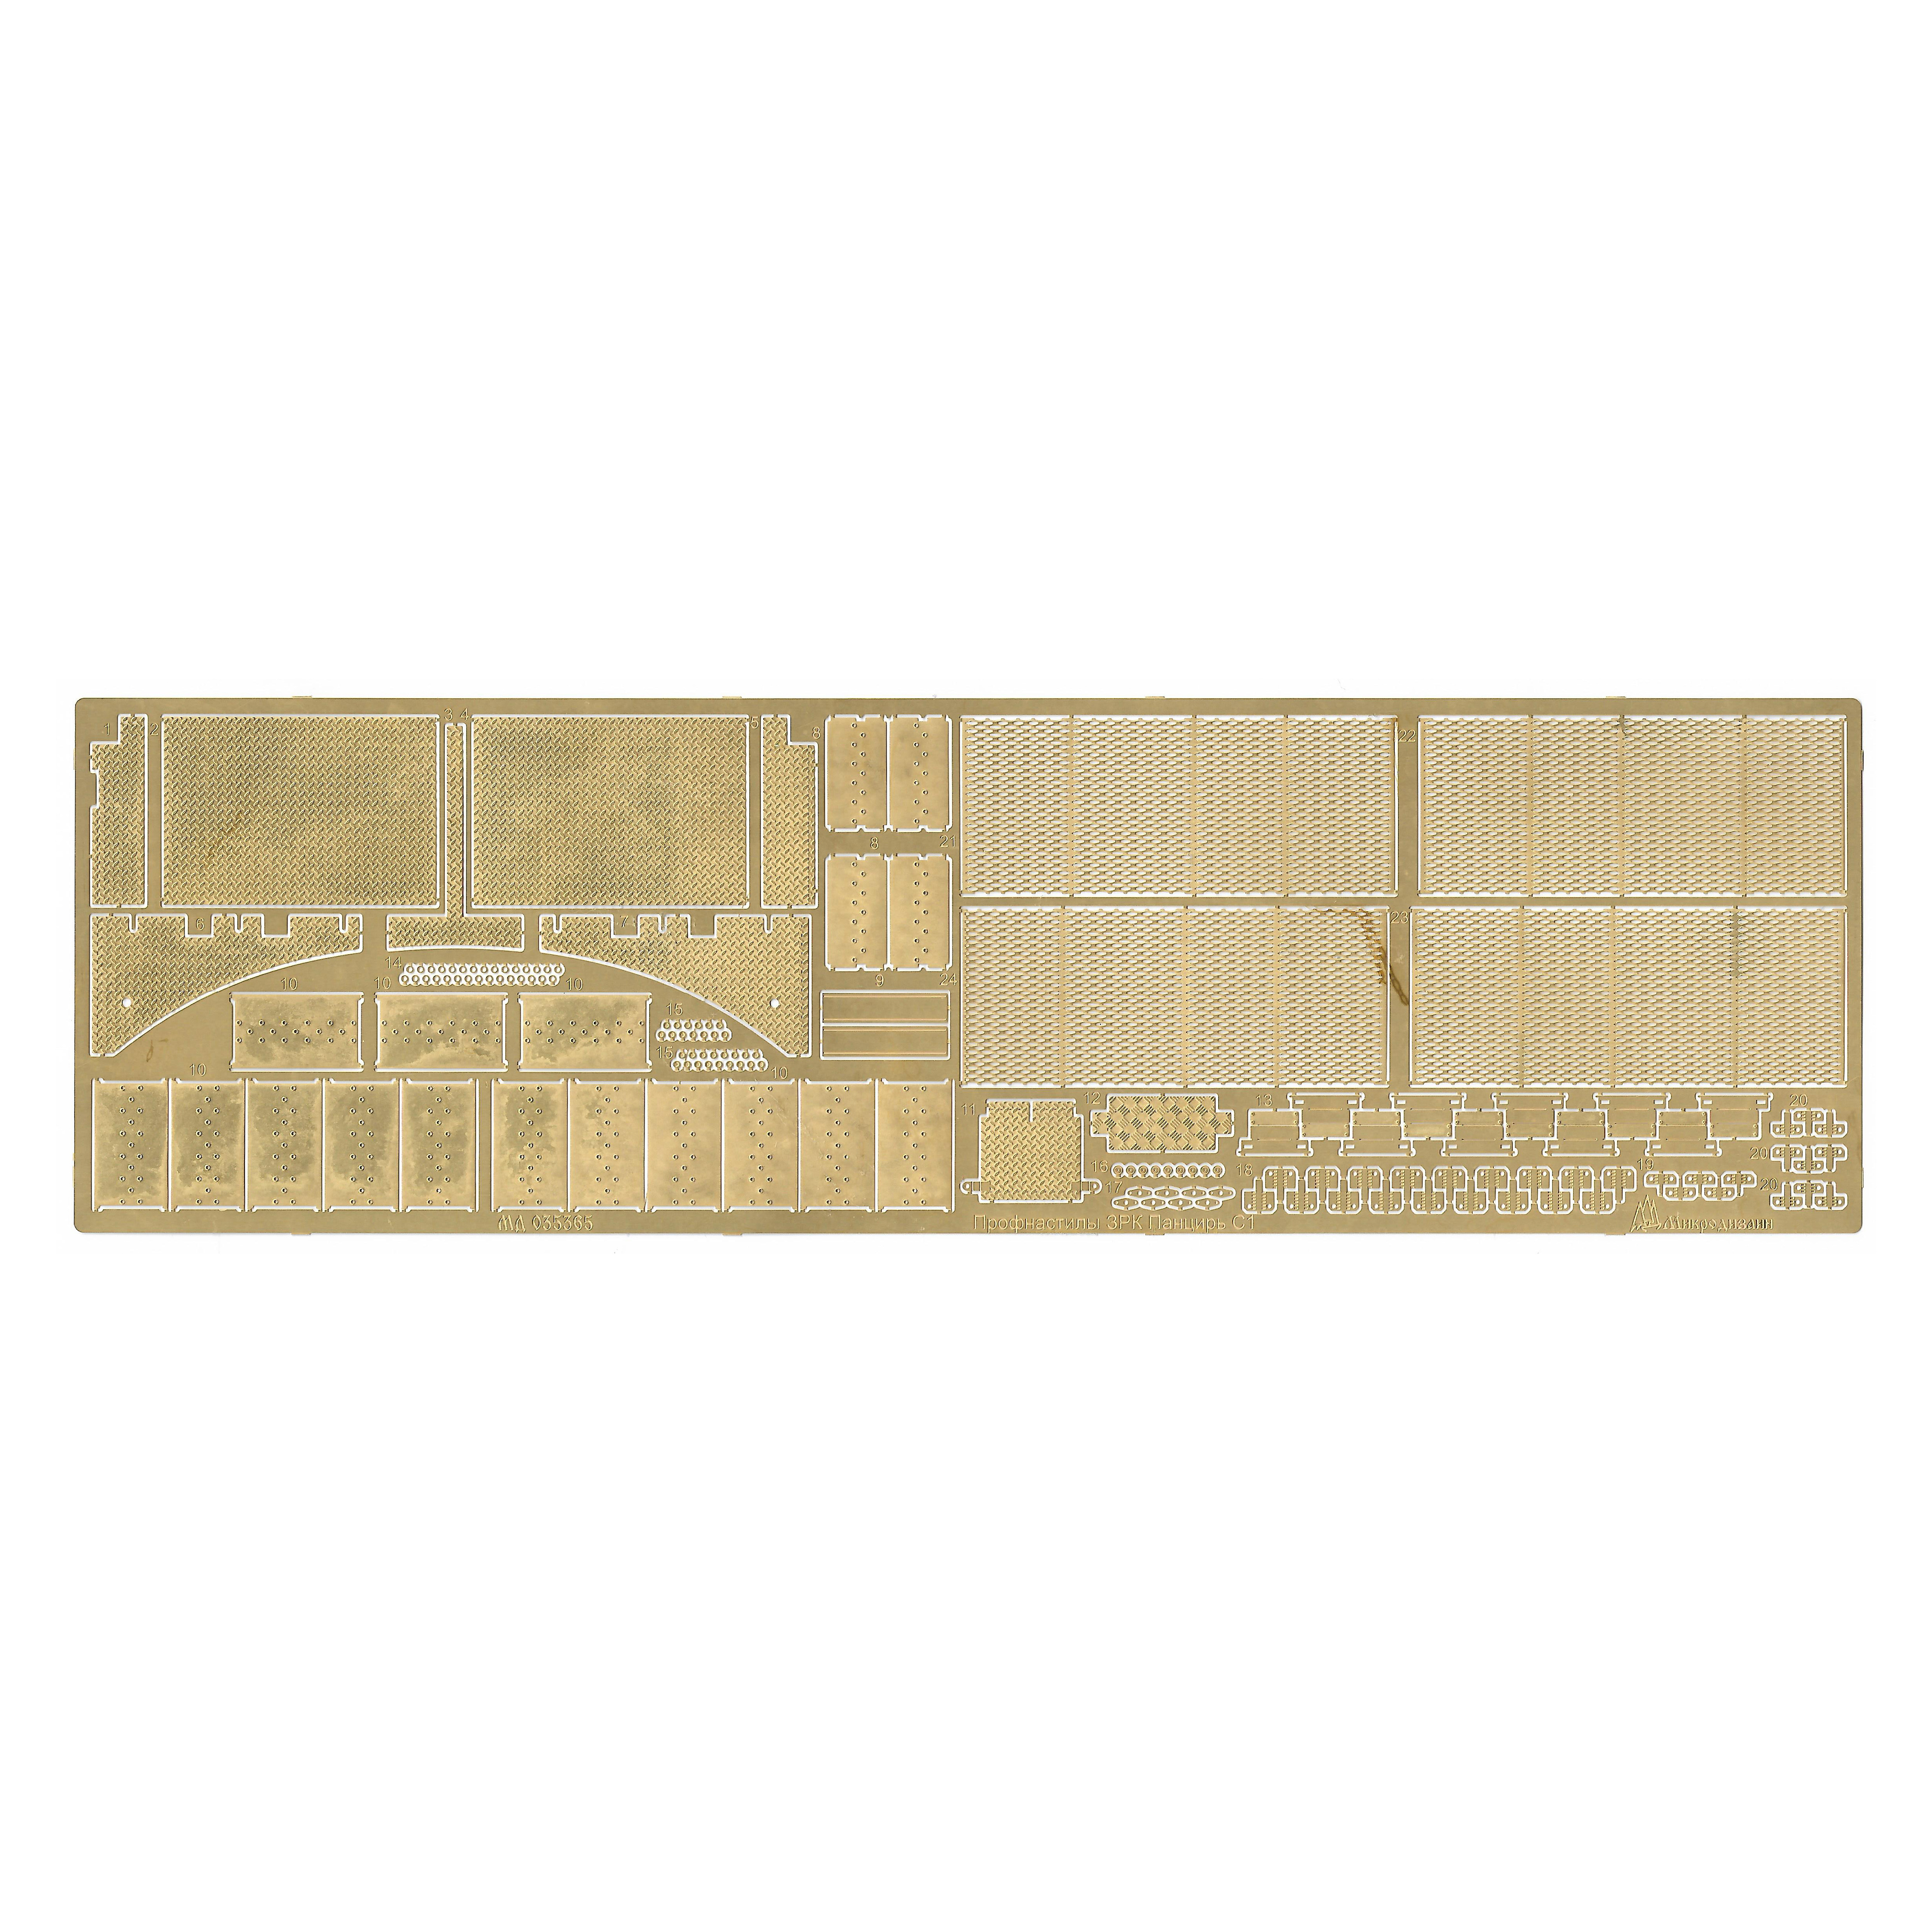 035363 Microdesign 1/35 Kit of photo-etched parts for zrpk Pantsir s-1 (mesh) from the Zvezda